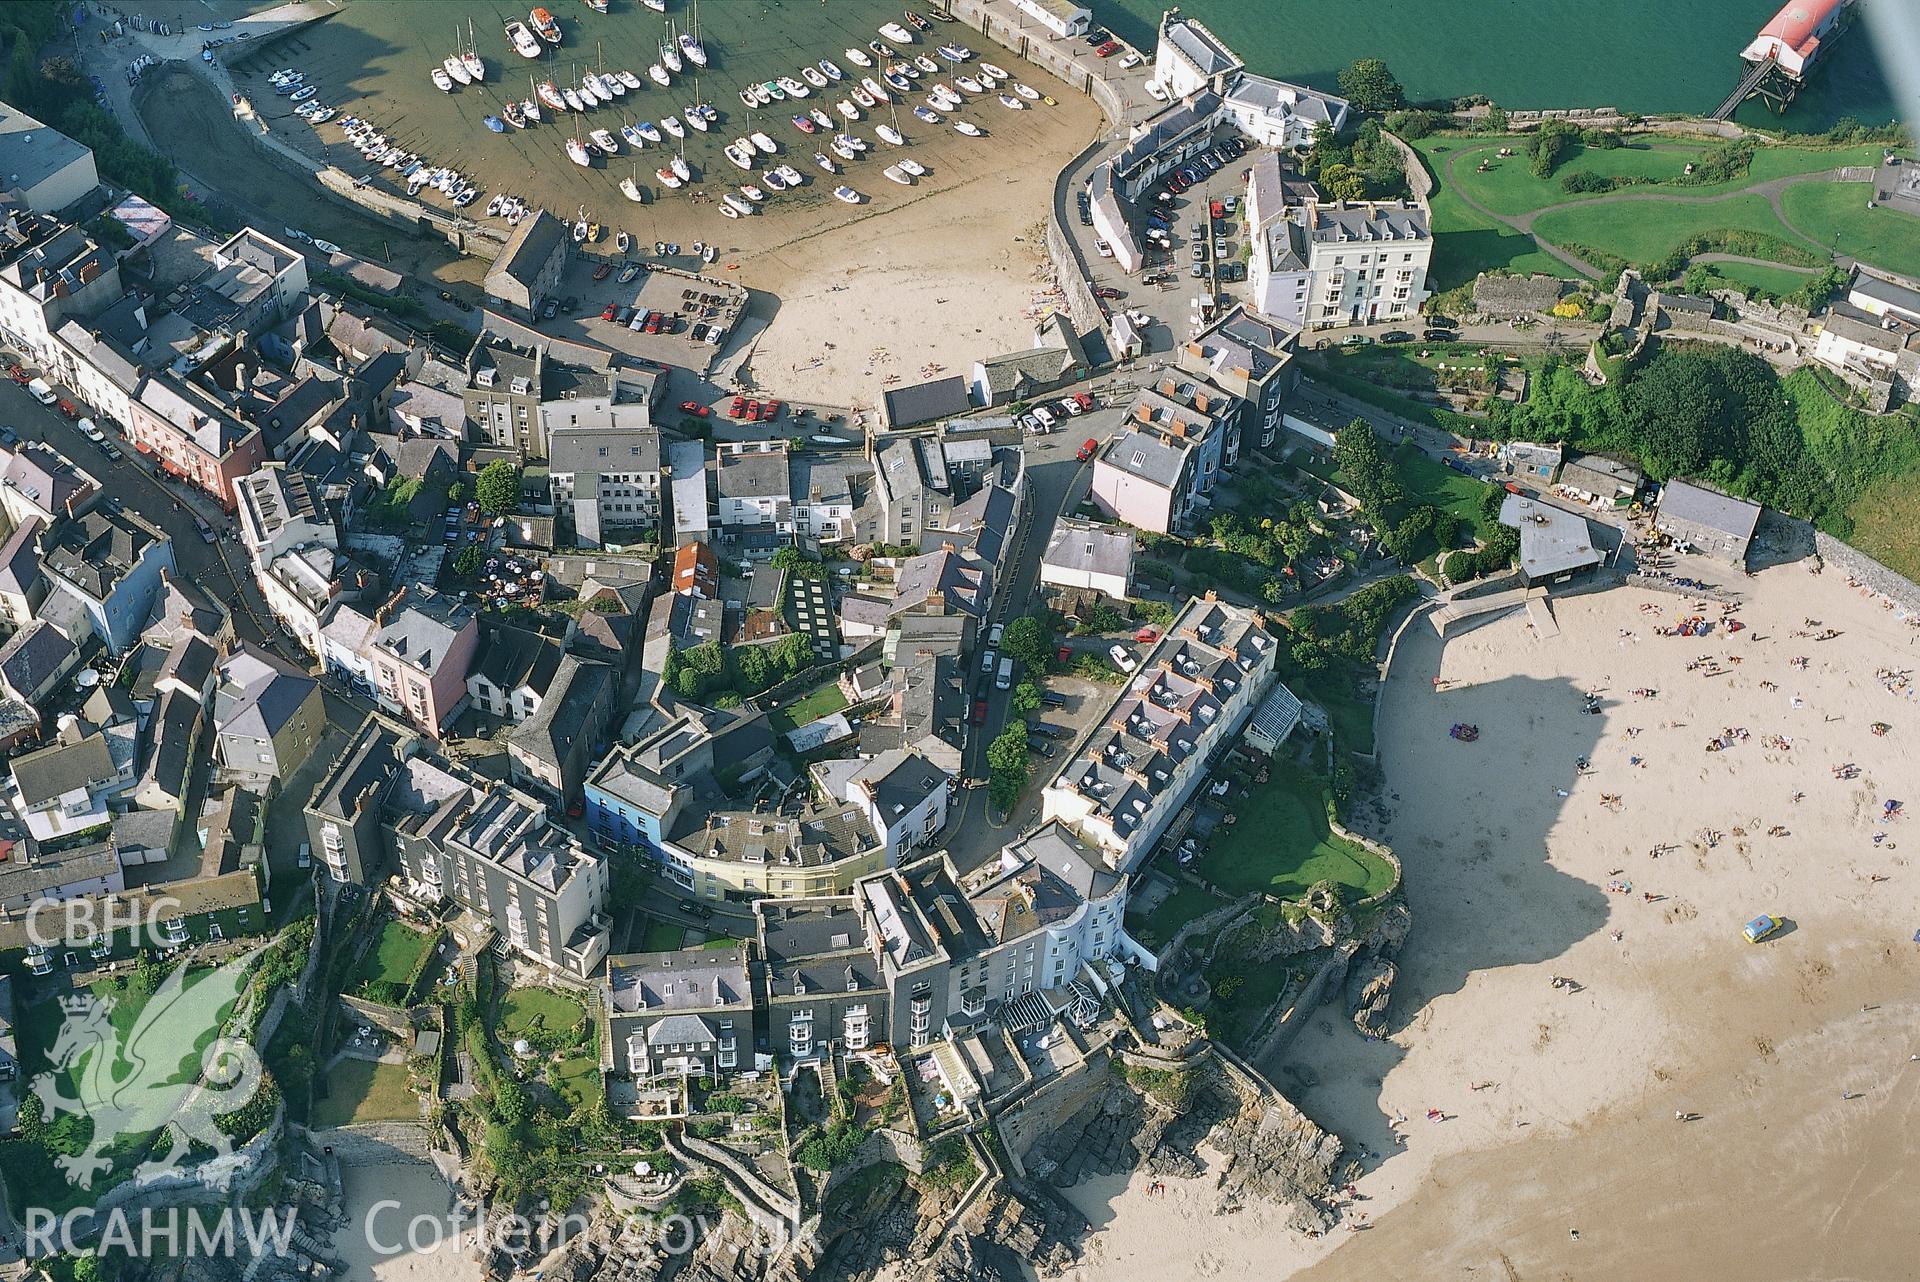 RCAHMW colour oblique aerial photograph of Tenby Town and Harbour.Taken by Toby Driver on 02/09/2002